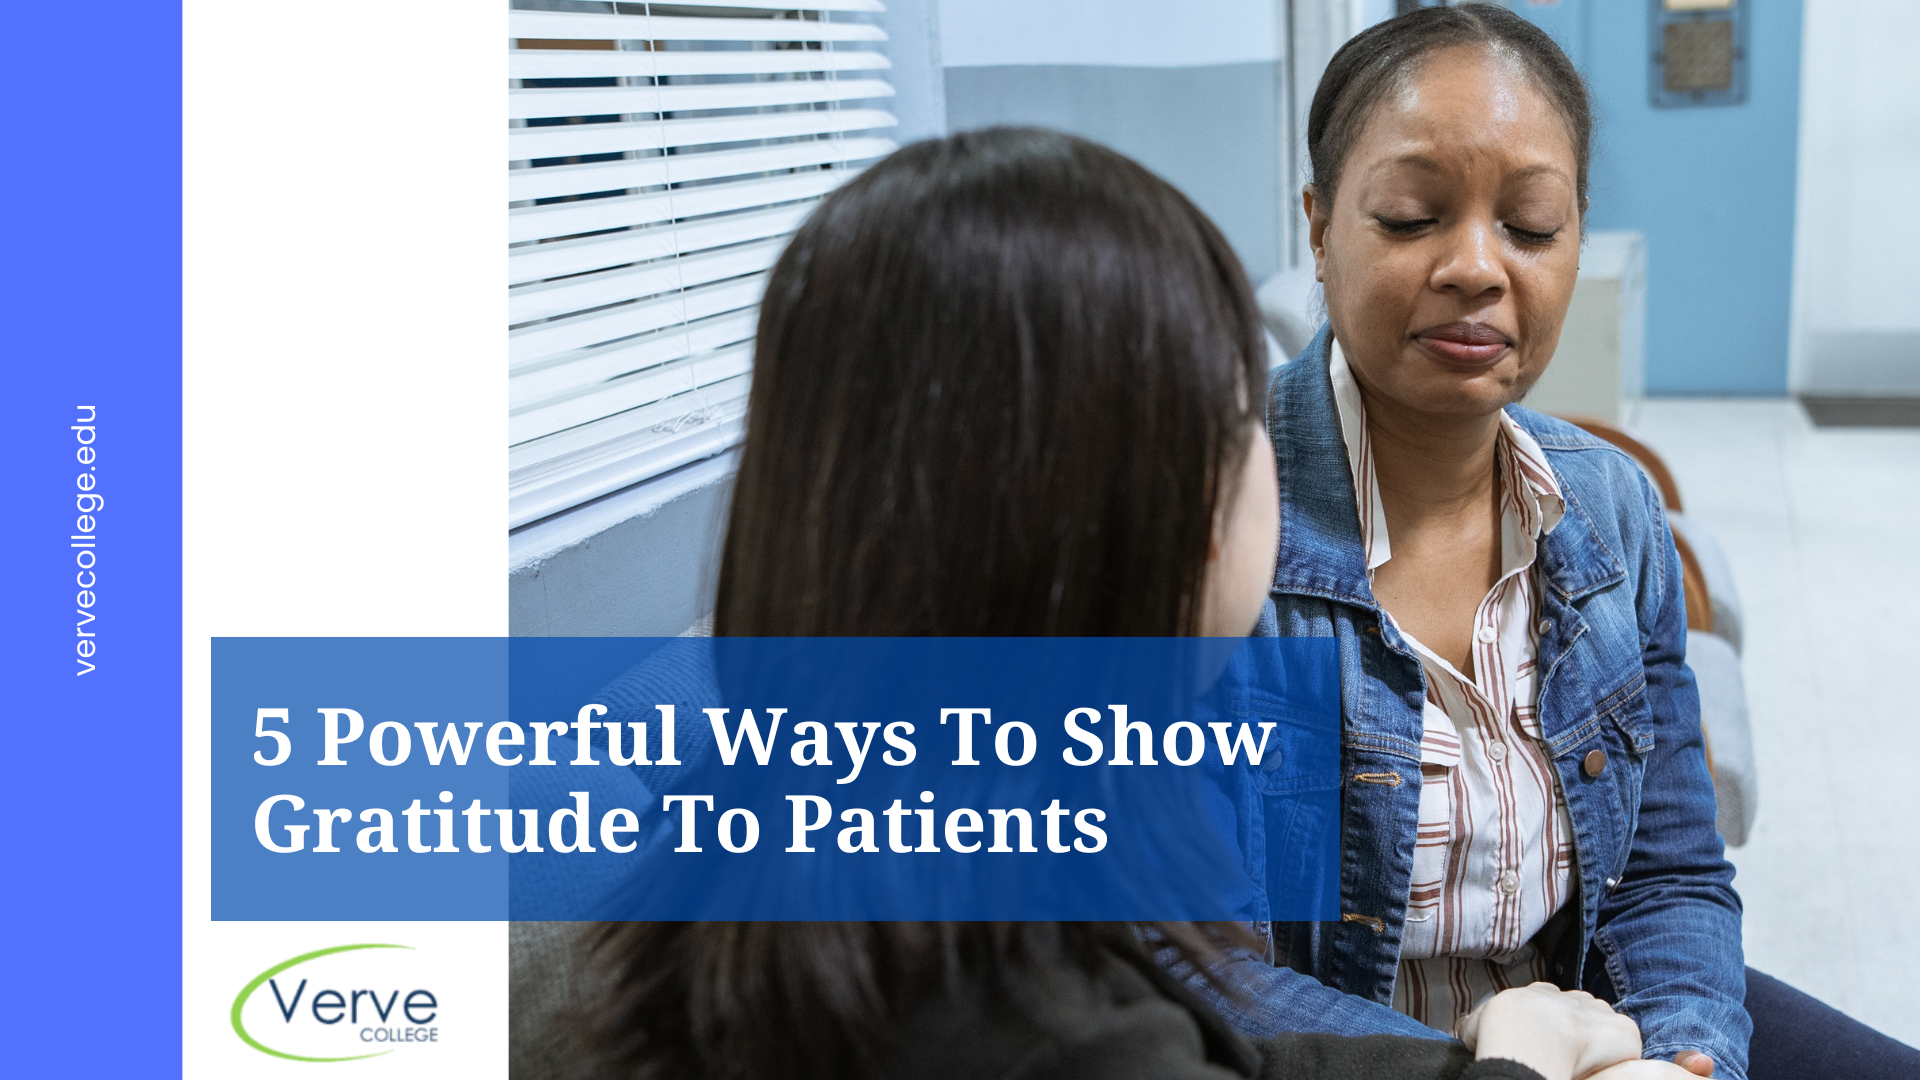 5 Powerful Ways To Show Gratitude To Patients